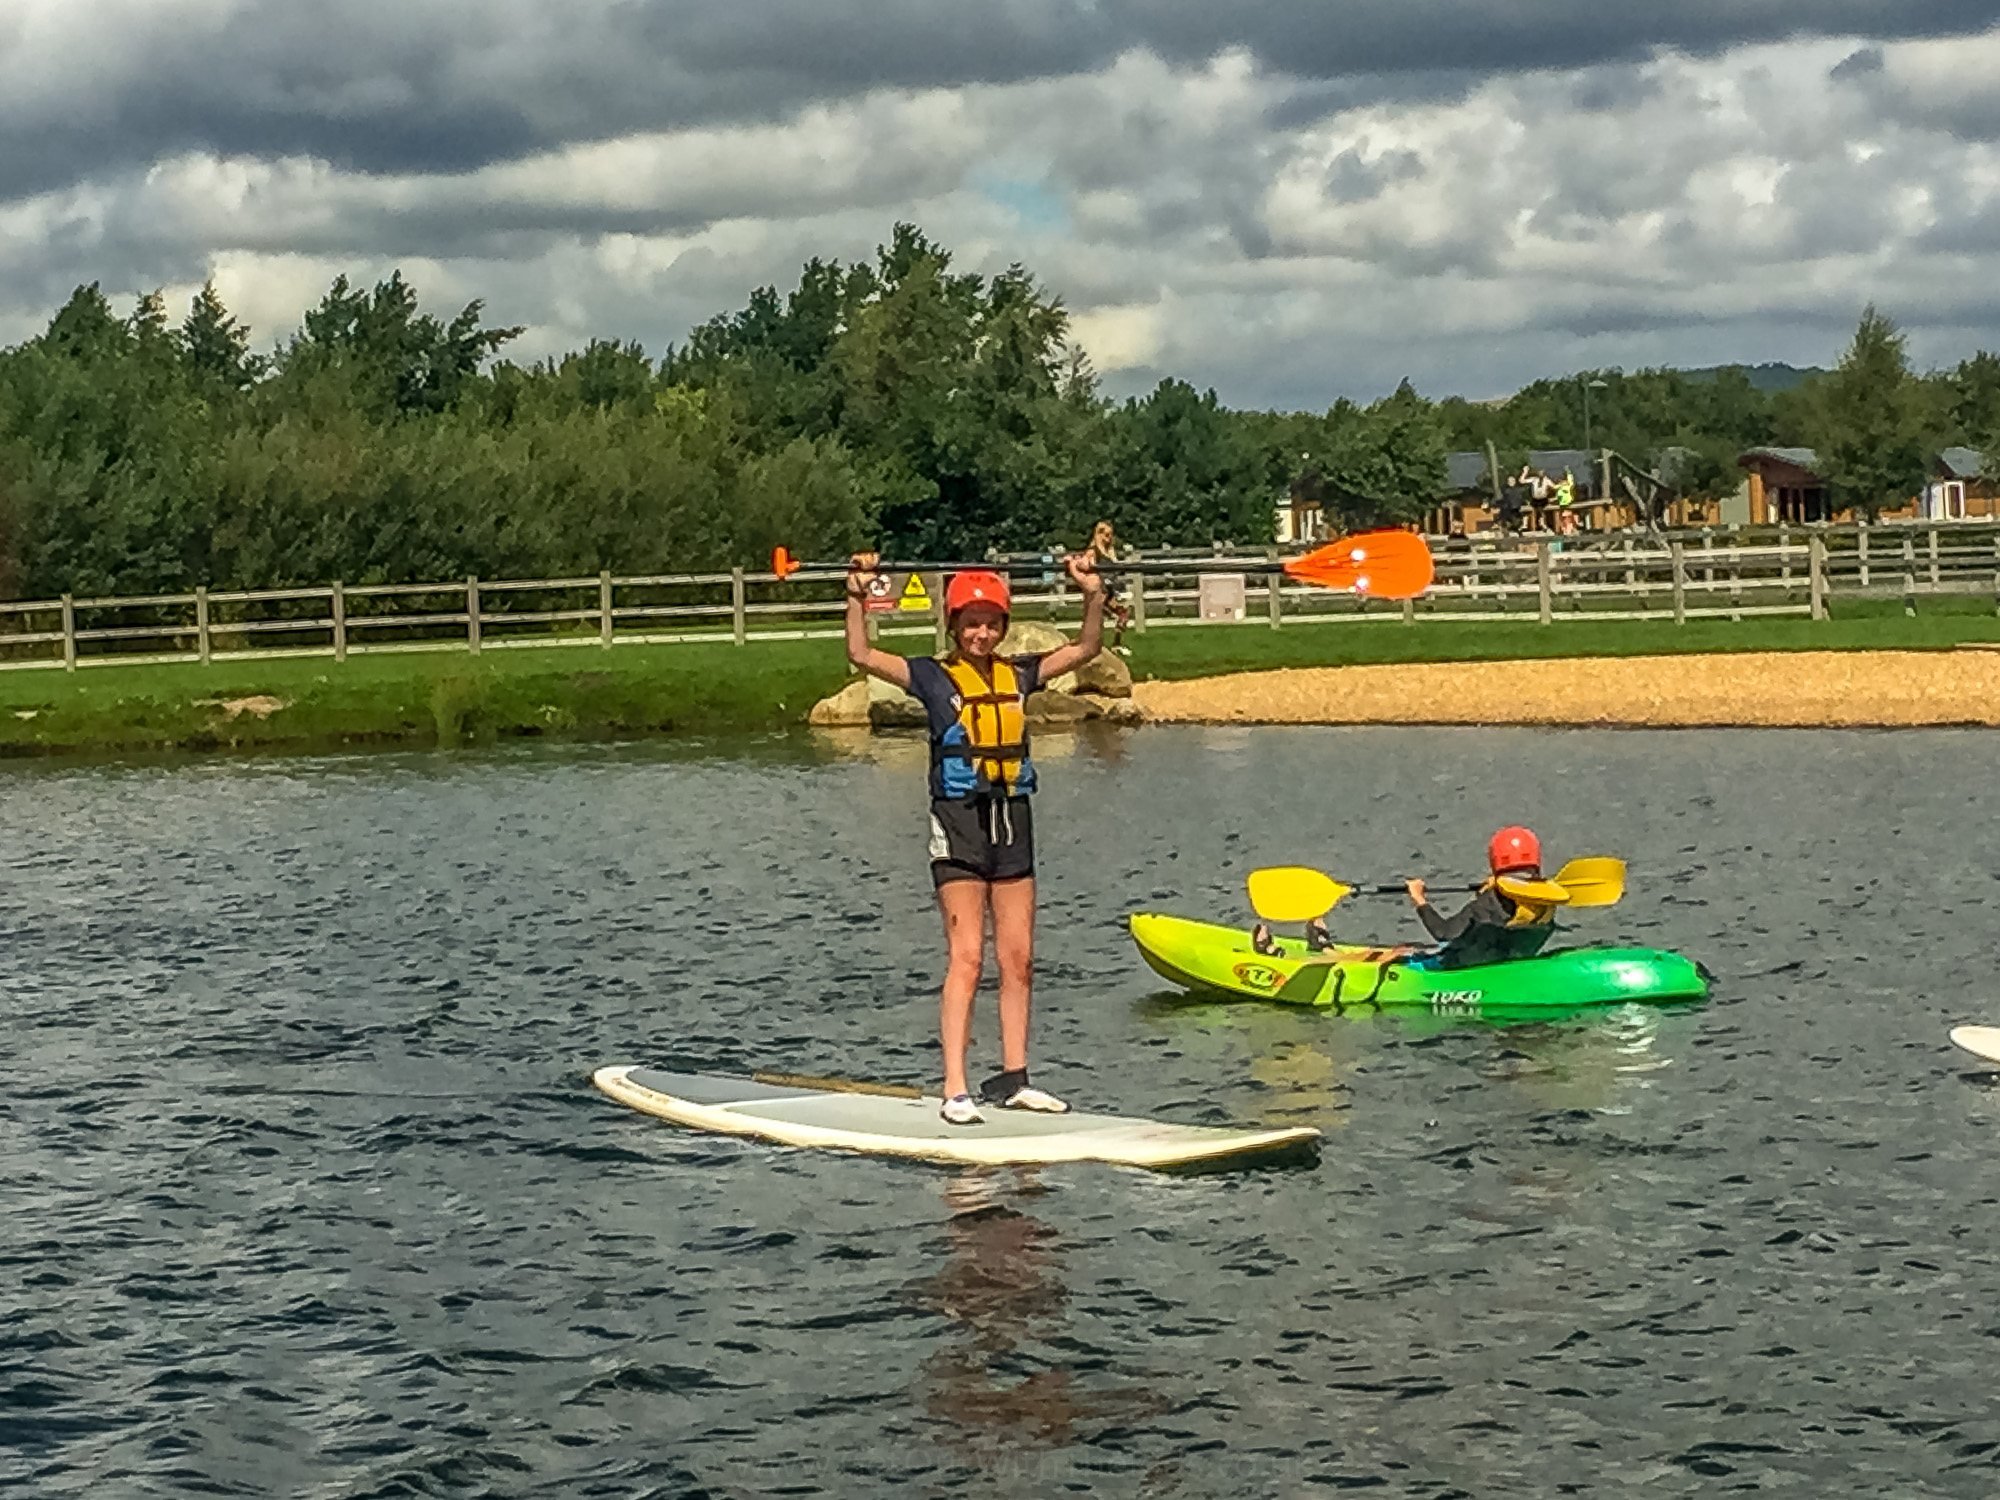 Showing confidence on the paddleboard